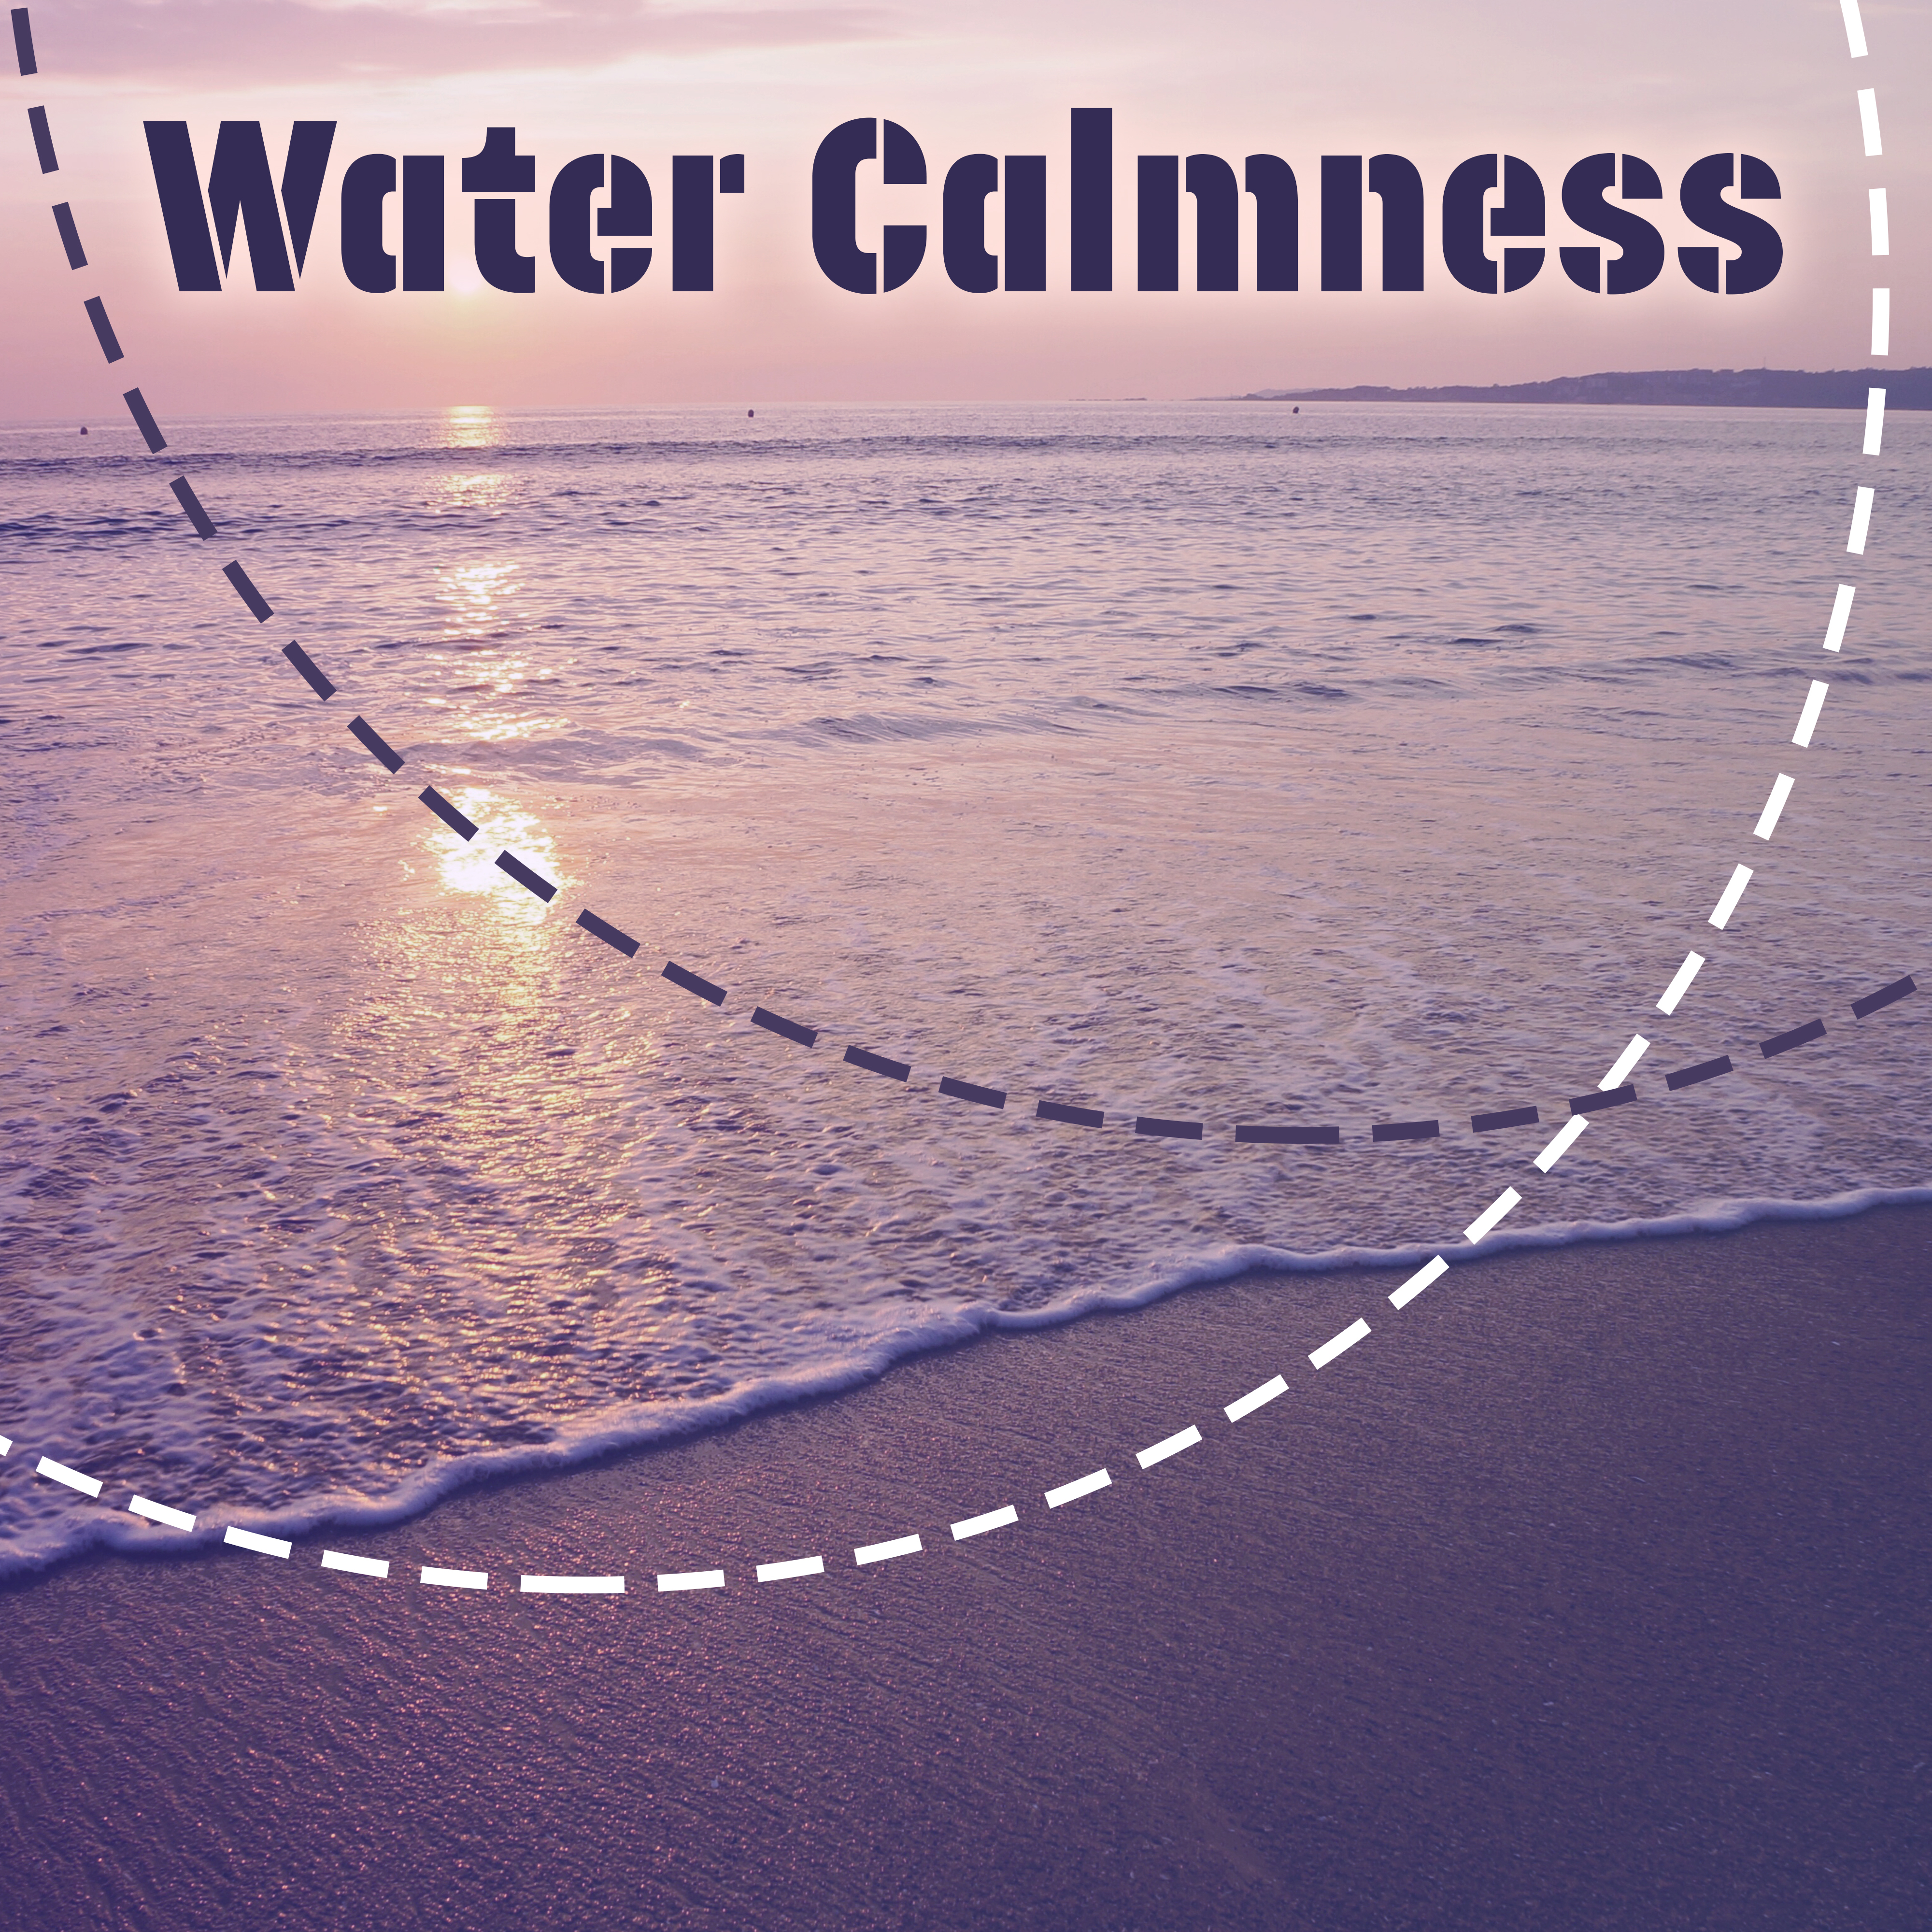 Water Calmness  Soft Nature Sounds, Inner Silence, Body  Mind Harmony, Stress Relief, New Age Relaxation